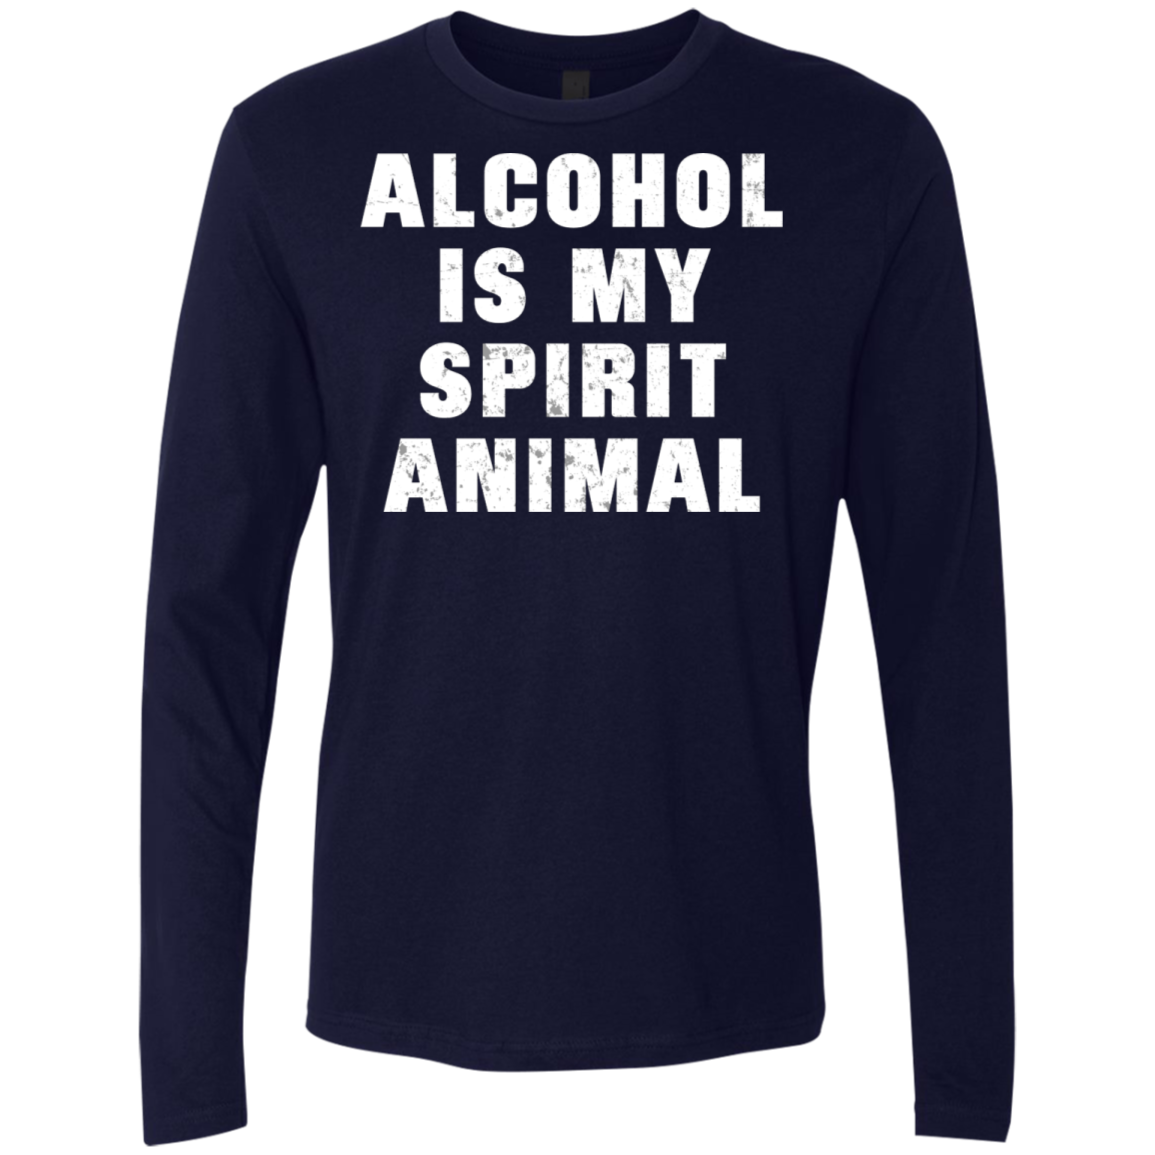 Alcohol Is My Spirit Animal T-Shirt Apparel - The Beer Lodge